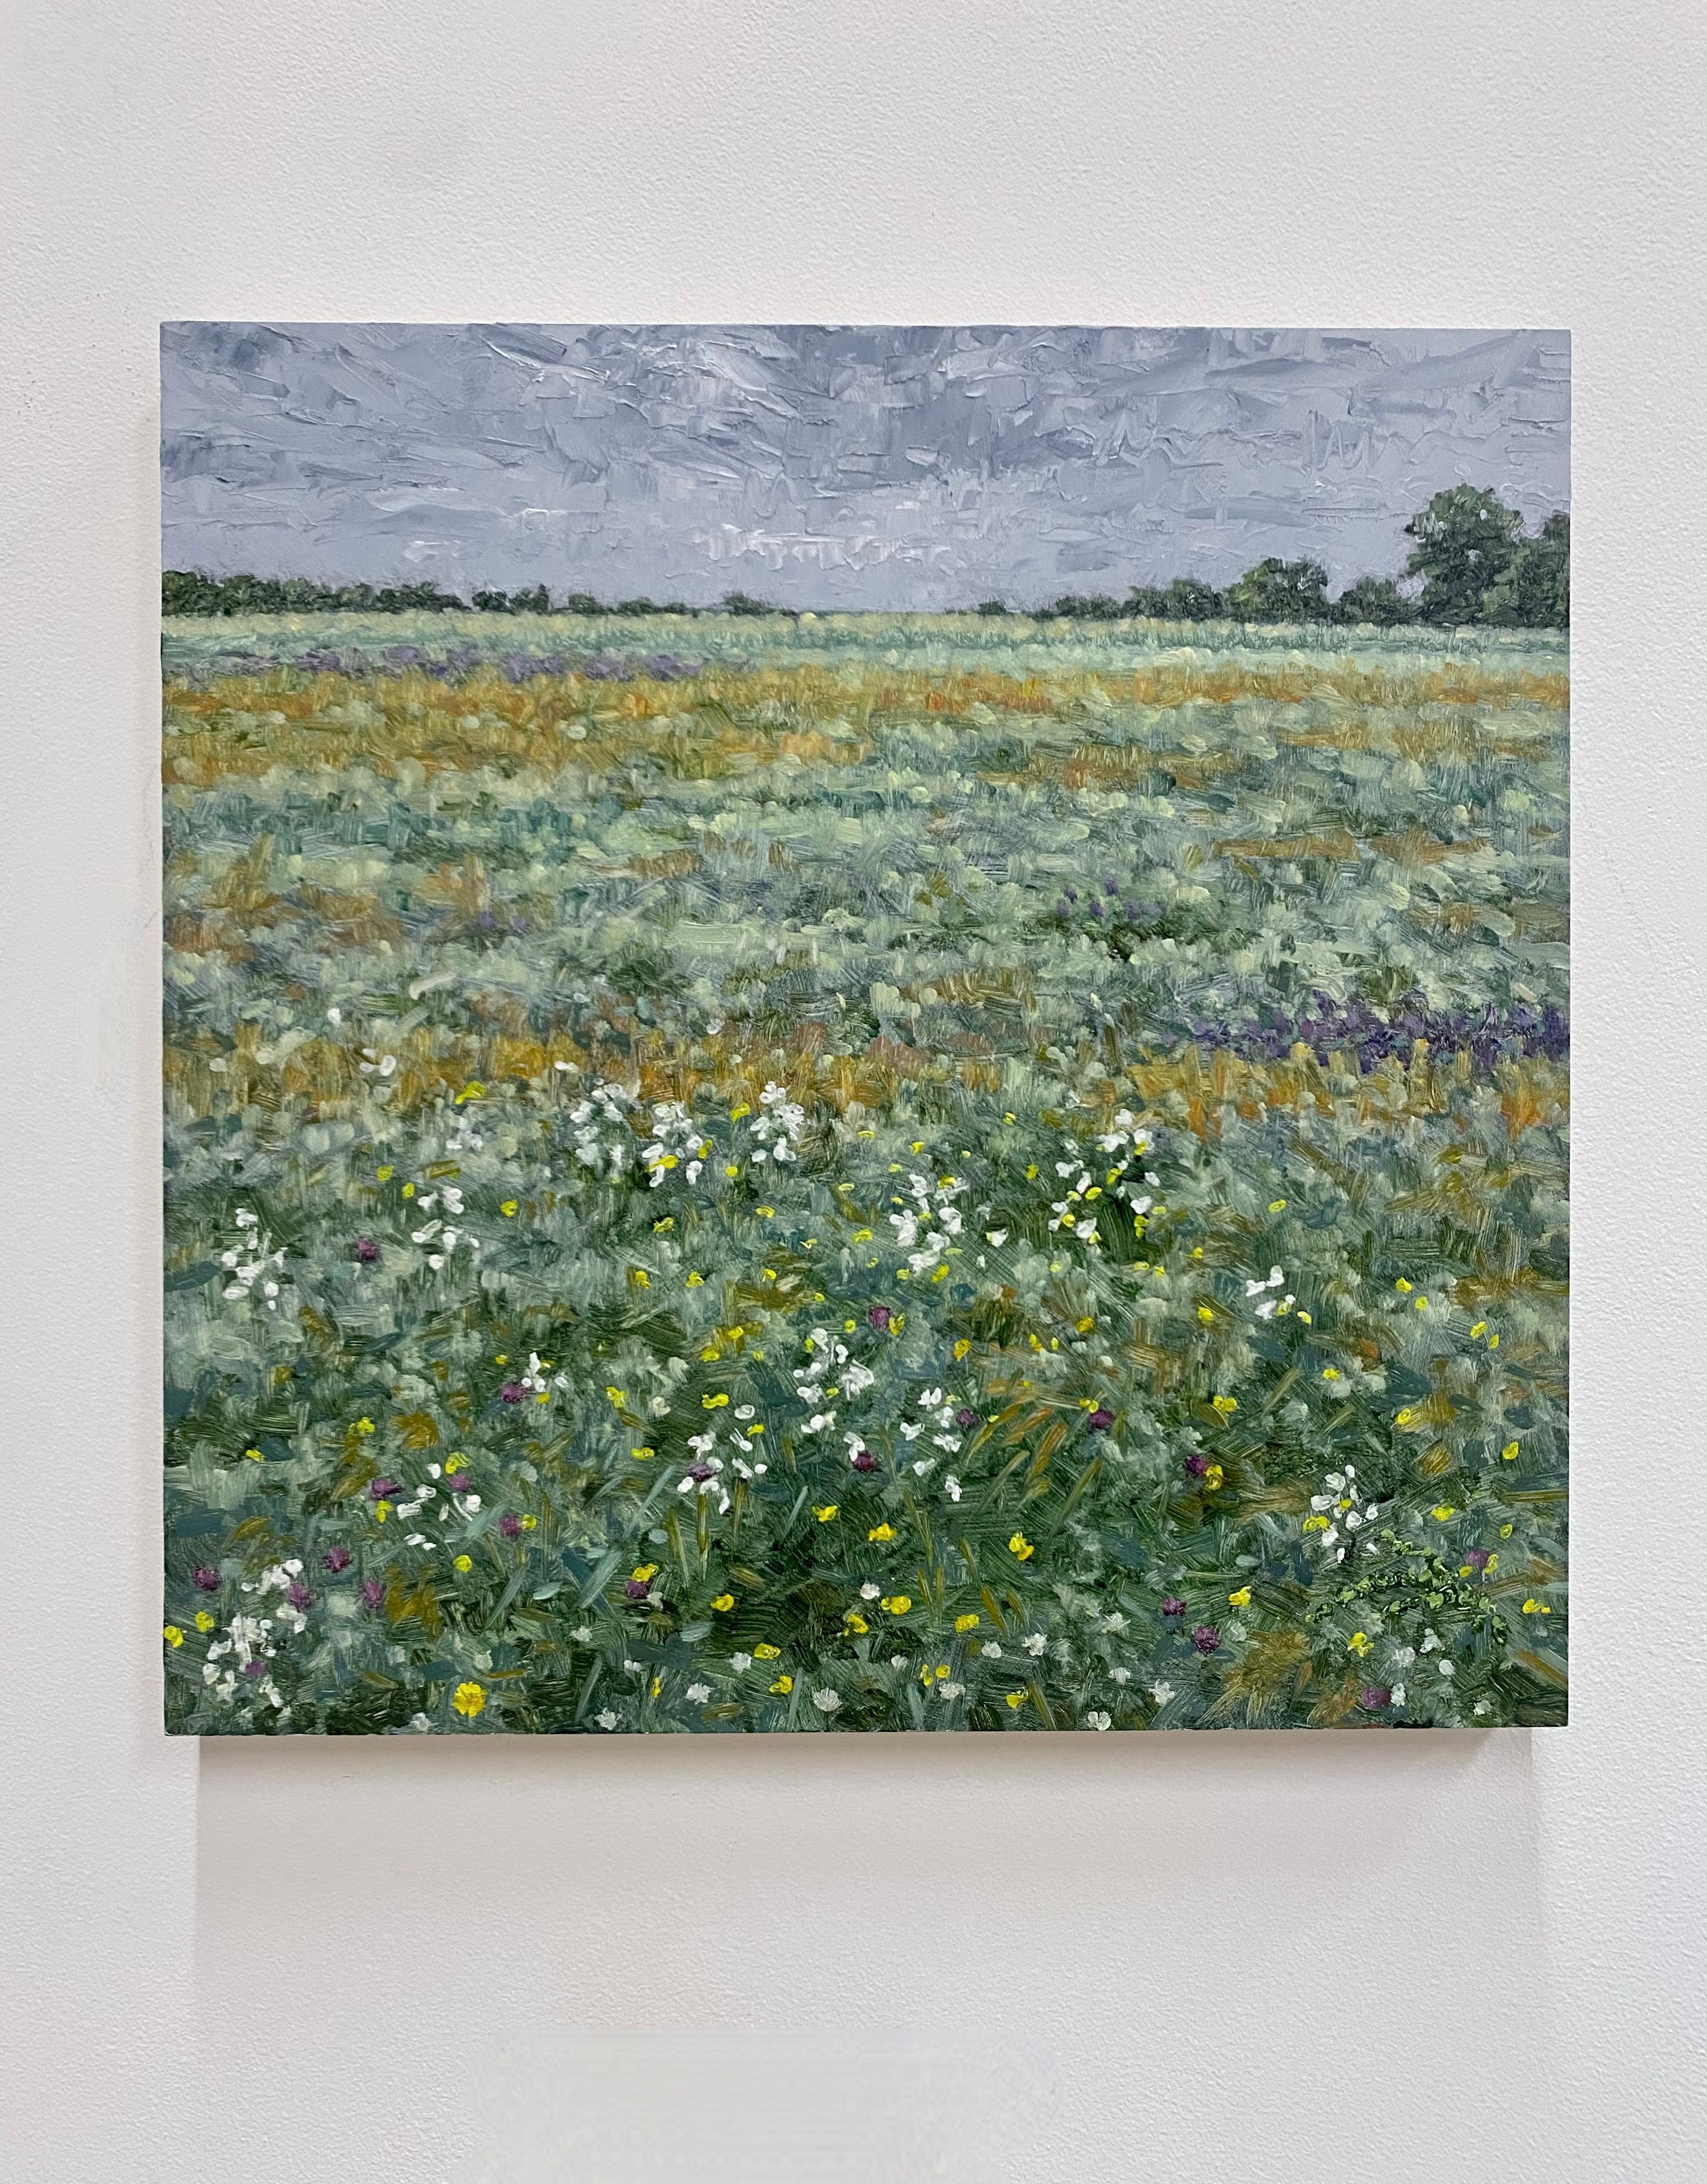 A peaceful outdoor scene with a grassy field with purple flowers, beautifully capturing the idyllic feel of a field of wildflowers in mid June. Signed, dated and titled on verso.

The paintings of Thomas Sarrantonio seek to mediate between realms of